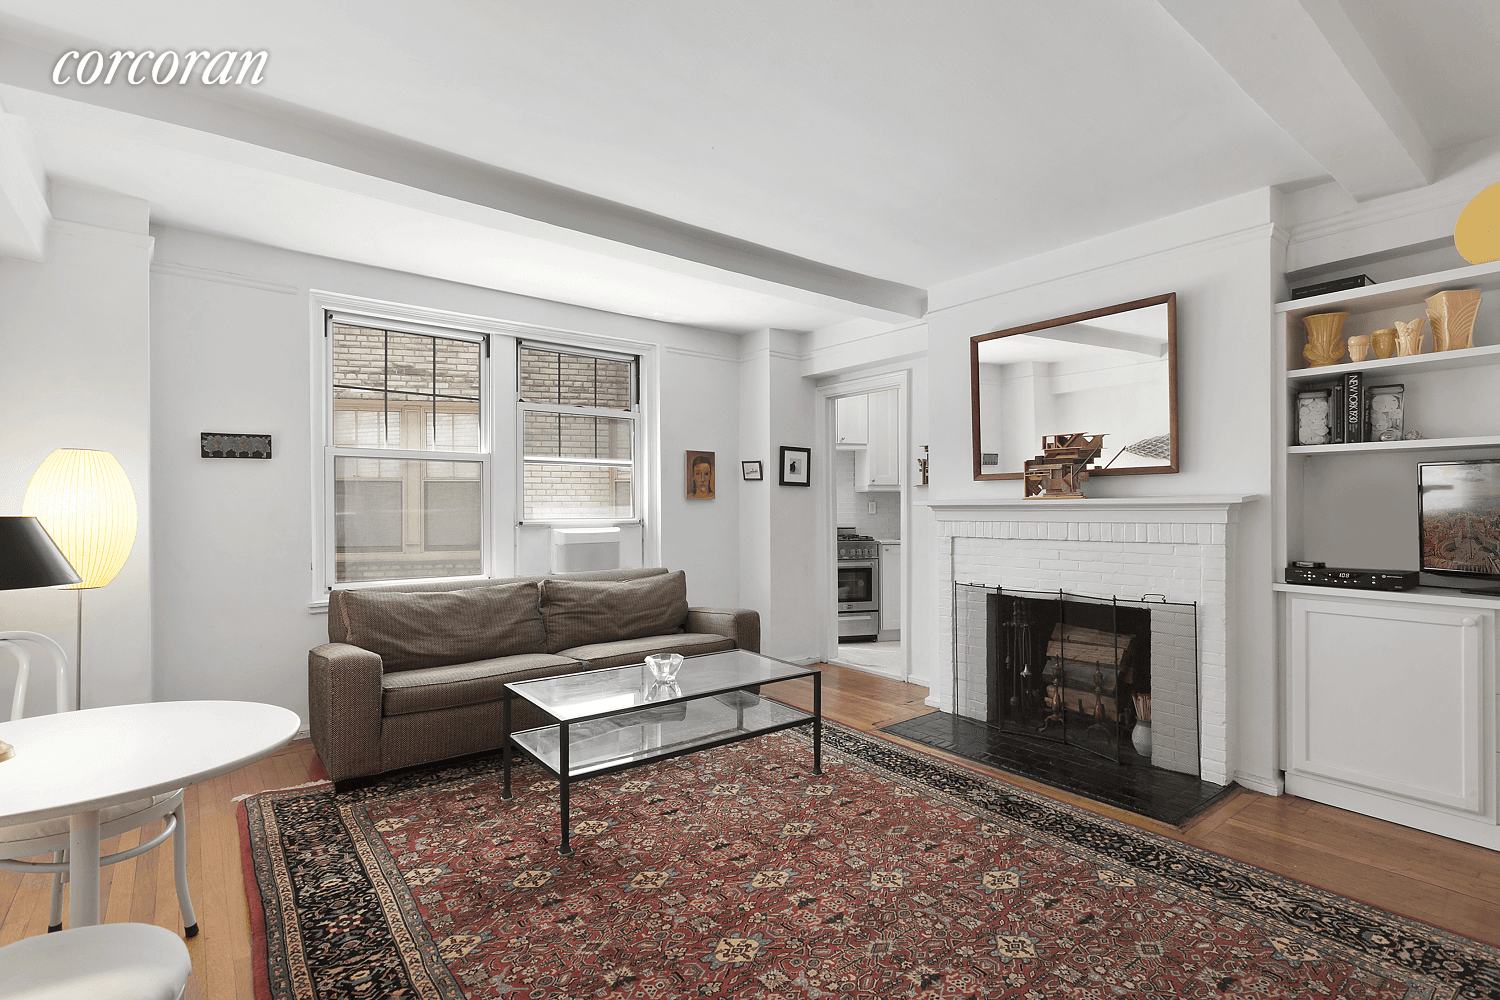 Cozy, charming, extremely quiet and move in ready best describes this well laid out Bing amp ; Bing studio in the heart of the West Village.